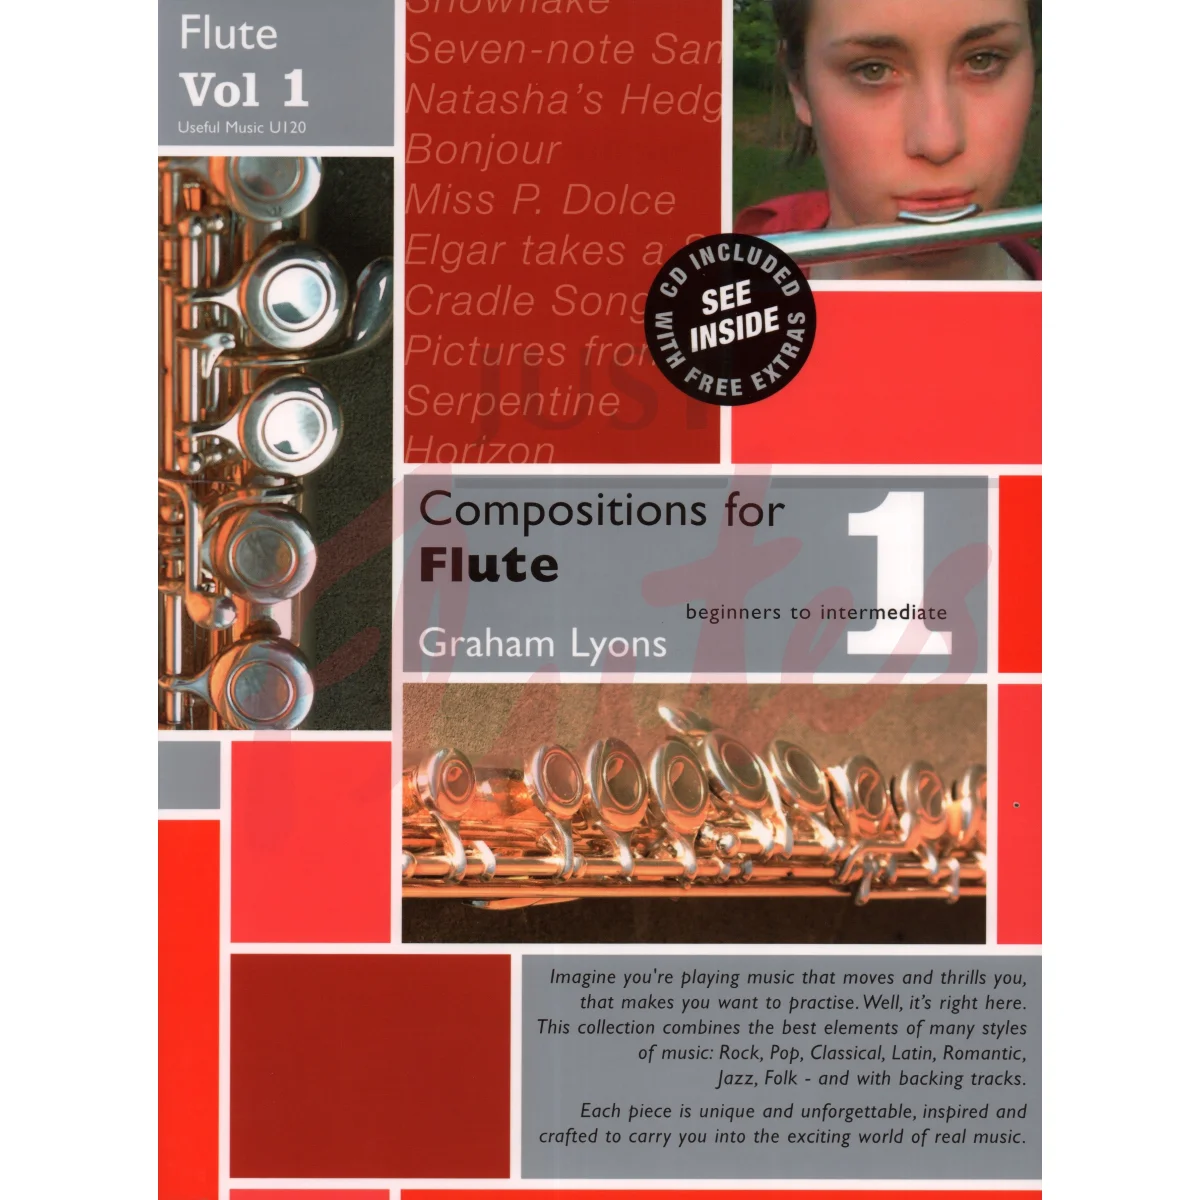 Compositions for Flute Vol 1